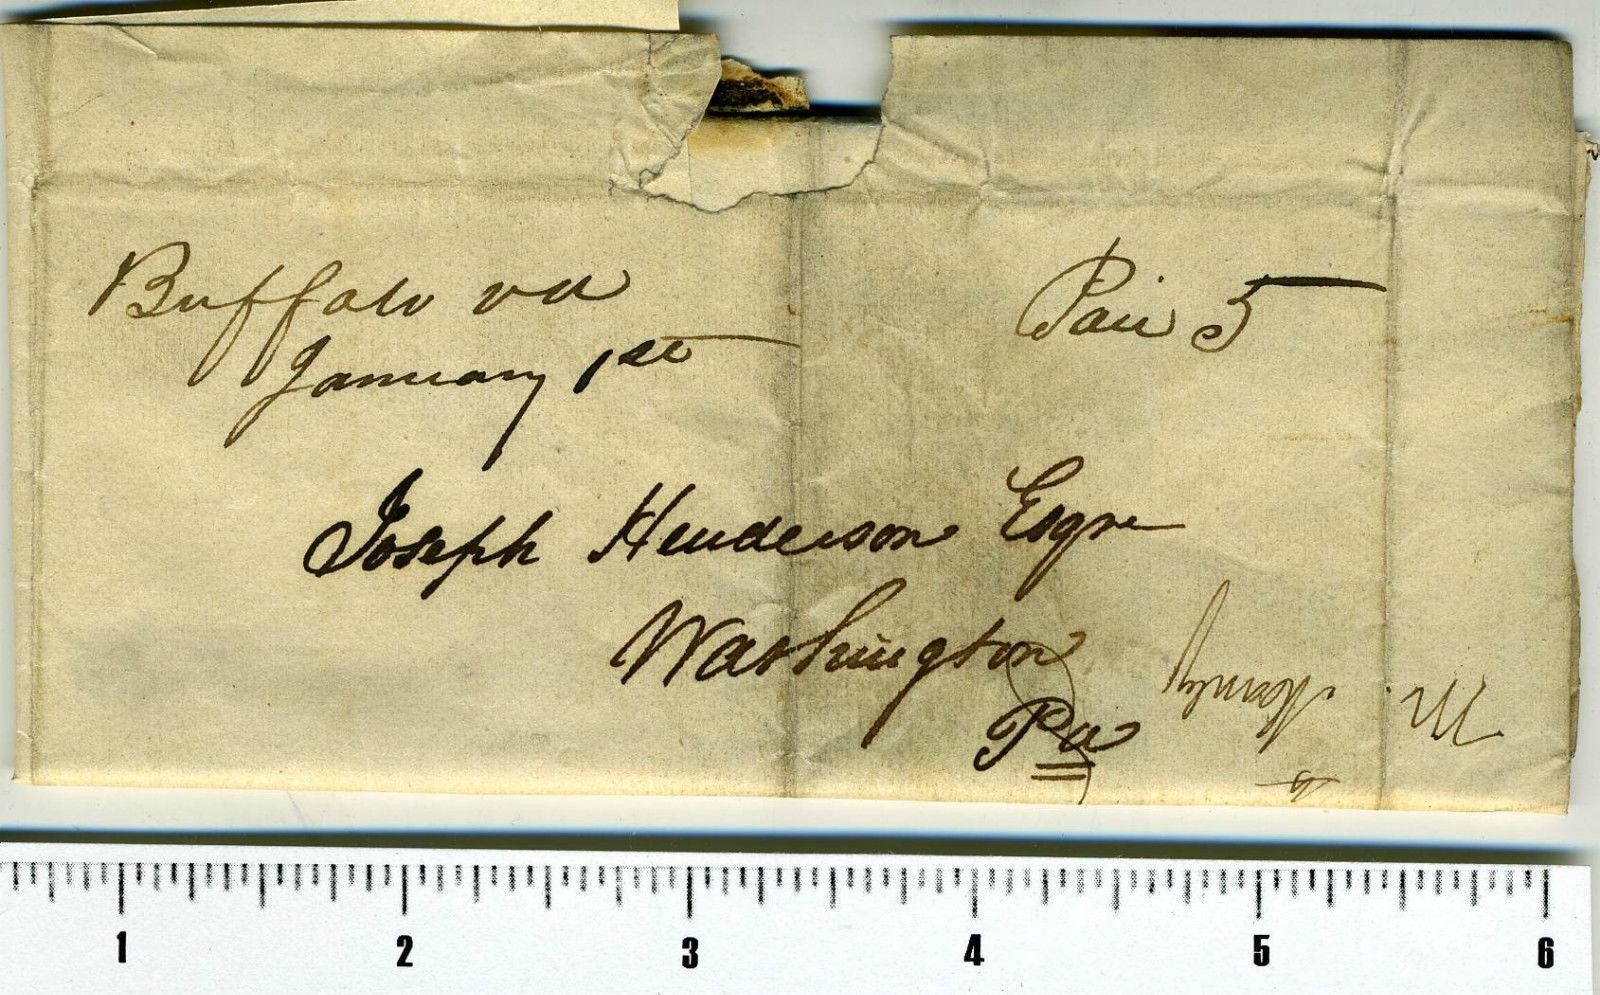 1846 letters mailed to a Washington, PA attorney from Naret regarding legal matters